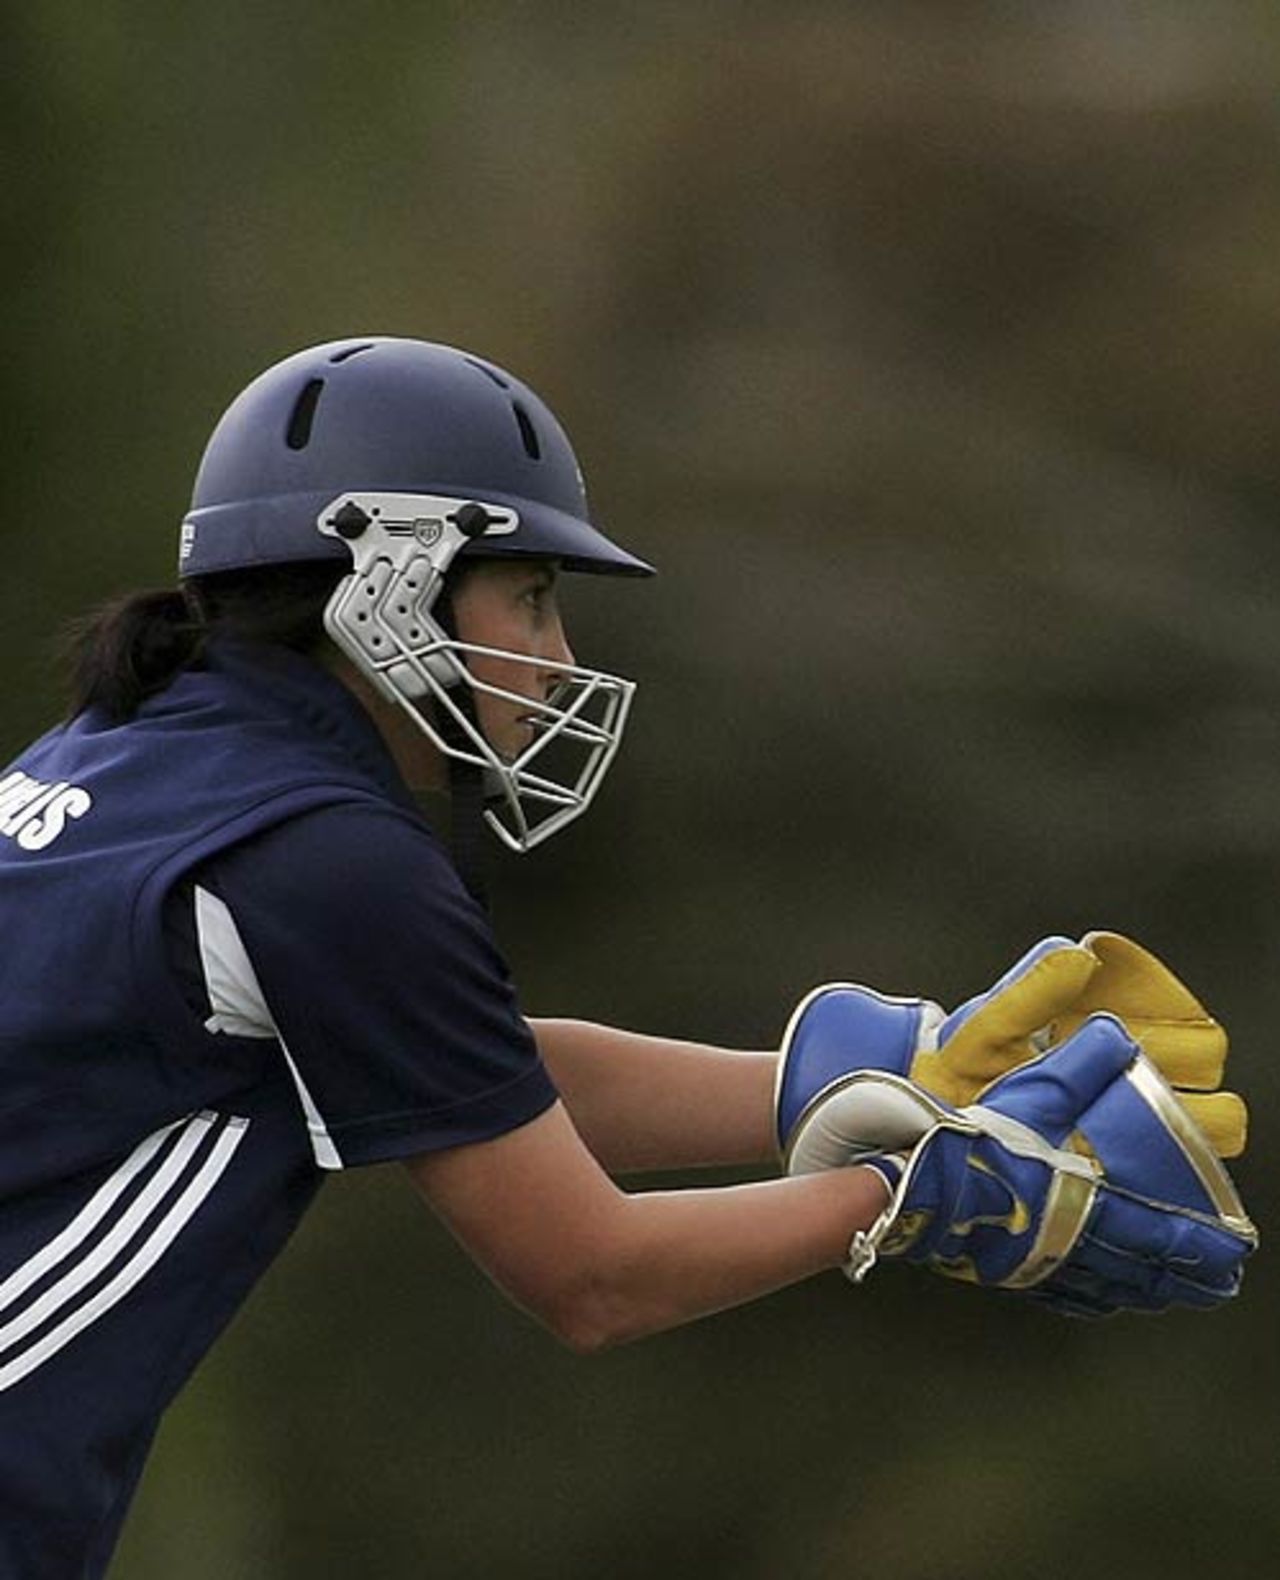 Emma Inglis gets ready to take a catch, Victoria v New South Wales, WNCL 2nd final, Melbourne, January 27, 2007